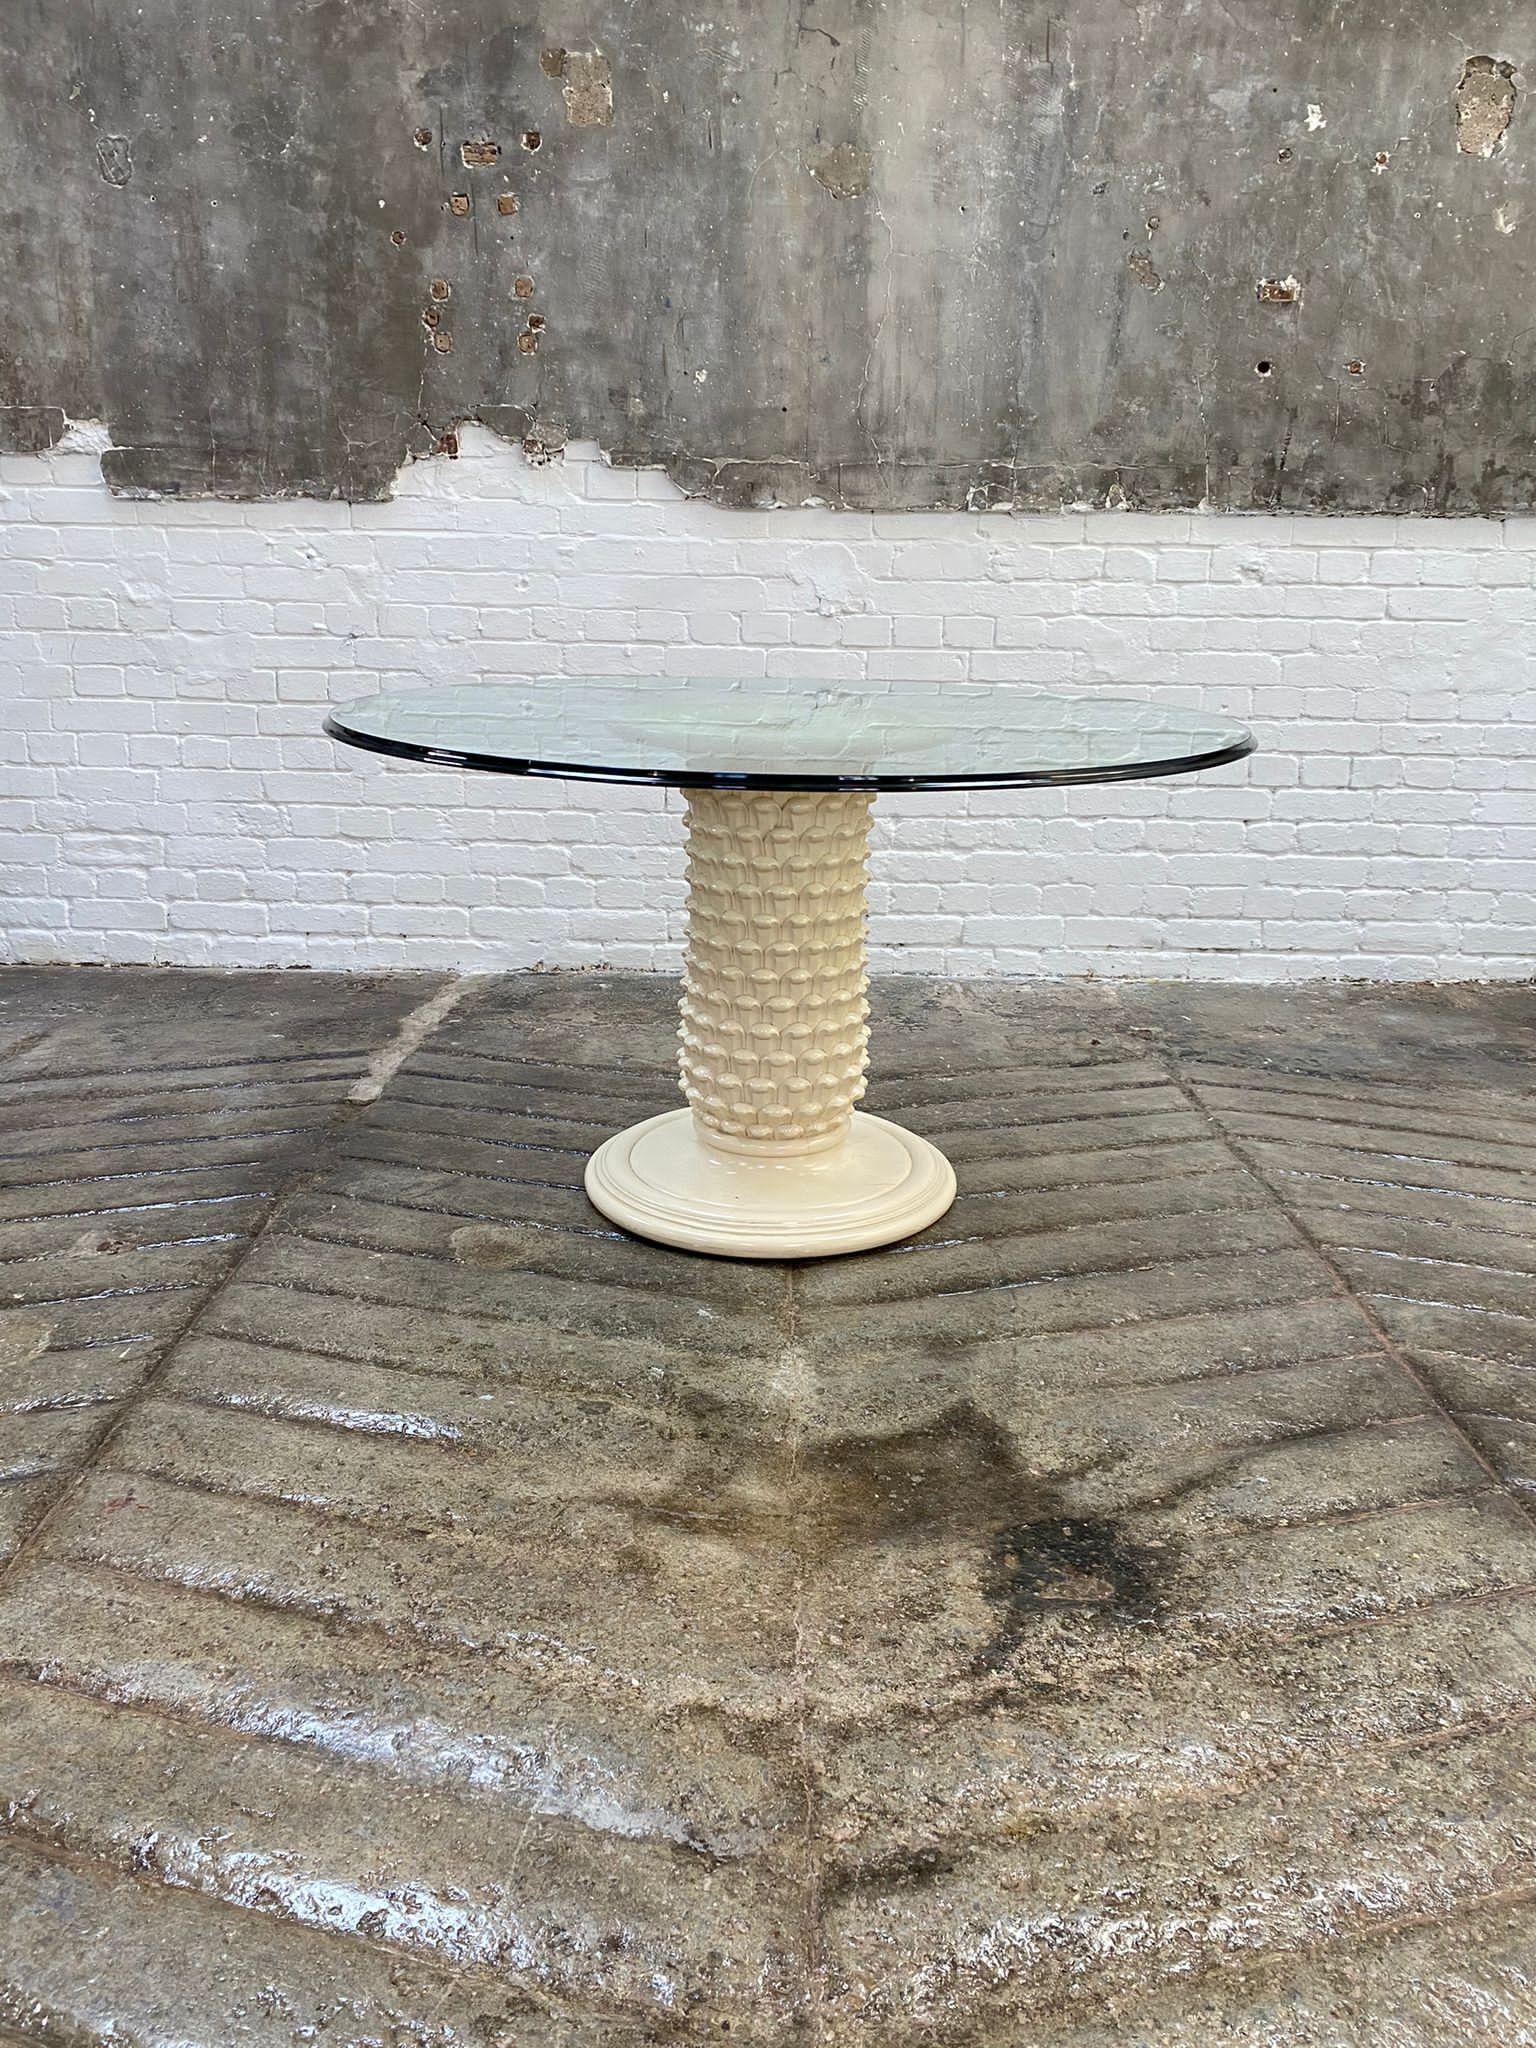 This dramatic sculptural table has a matte cream/white finish, a lacquer on wood, with a removable beveled clear glass top. In the manner of Serge Roche or Dorothy Draper. This cool piece sits six people, or would make a wonderful centre table in